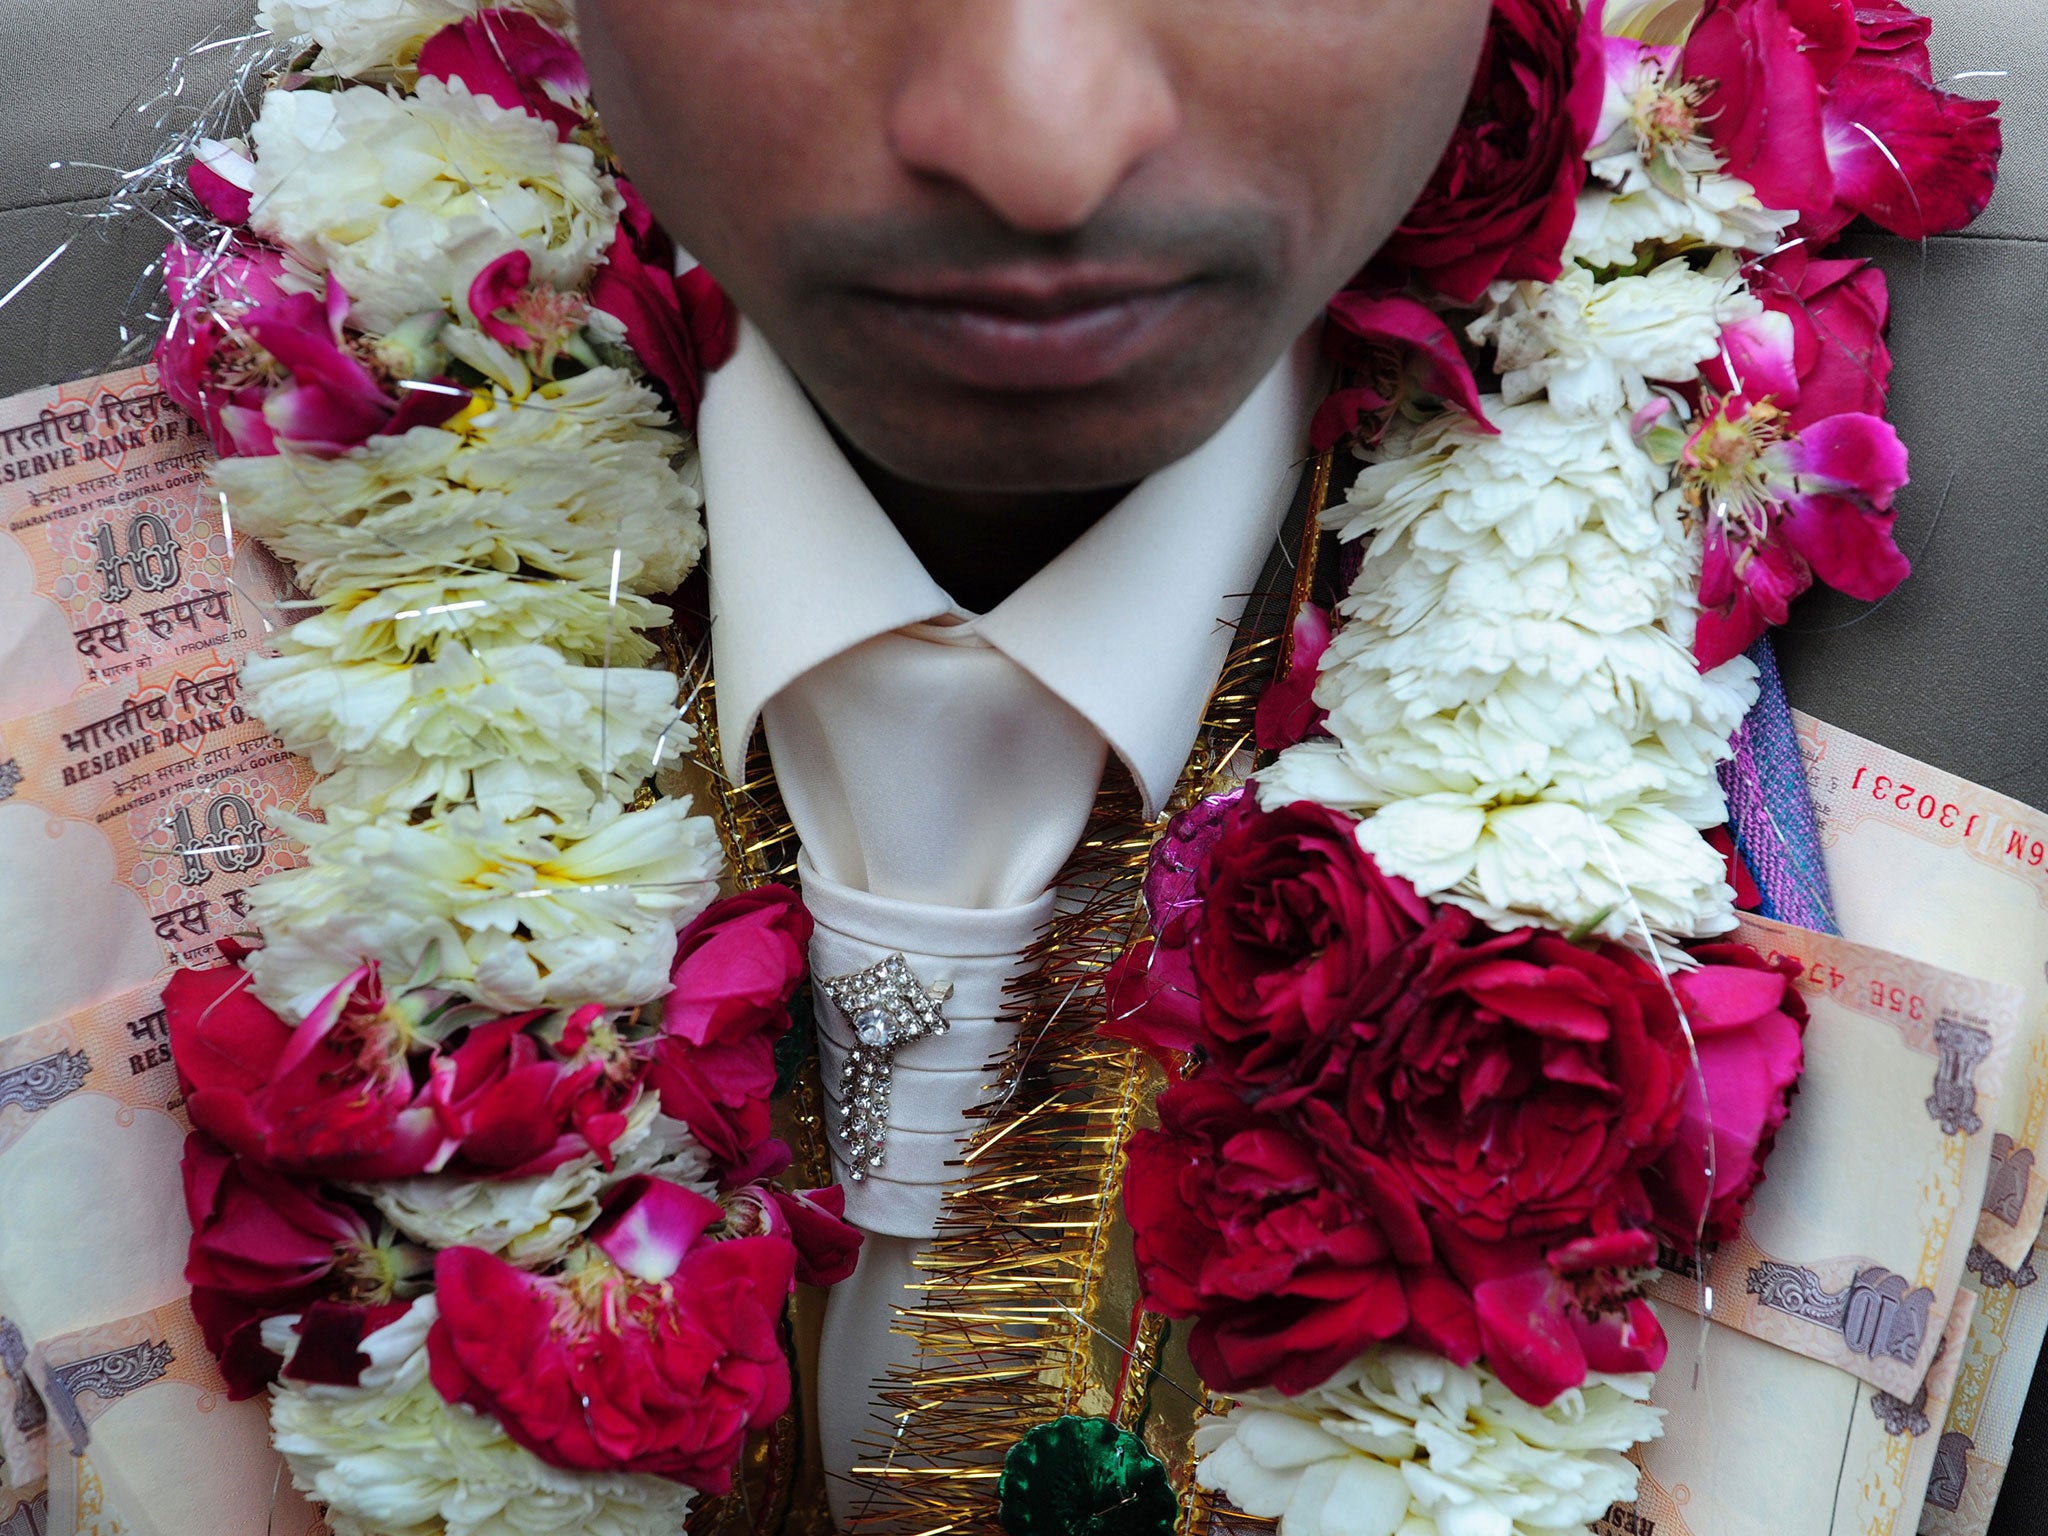 The couple were exchanging traditional flower garlands when the groom had a seizure